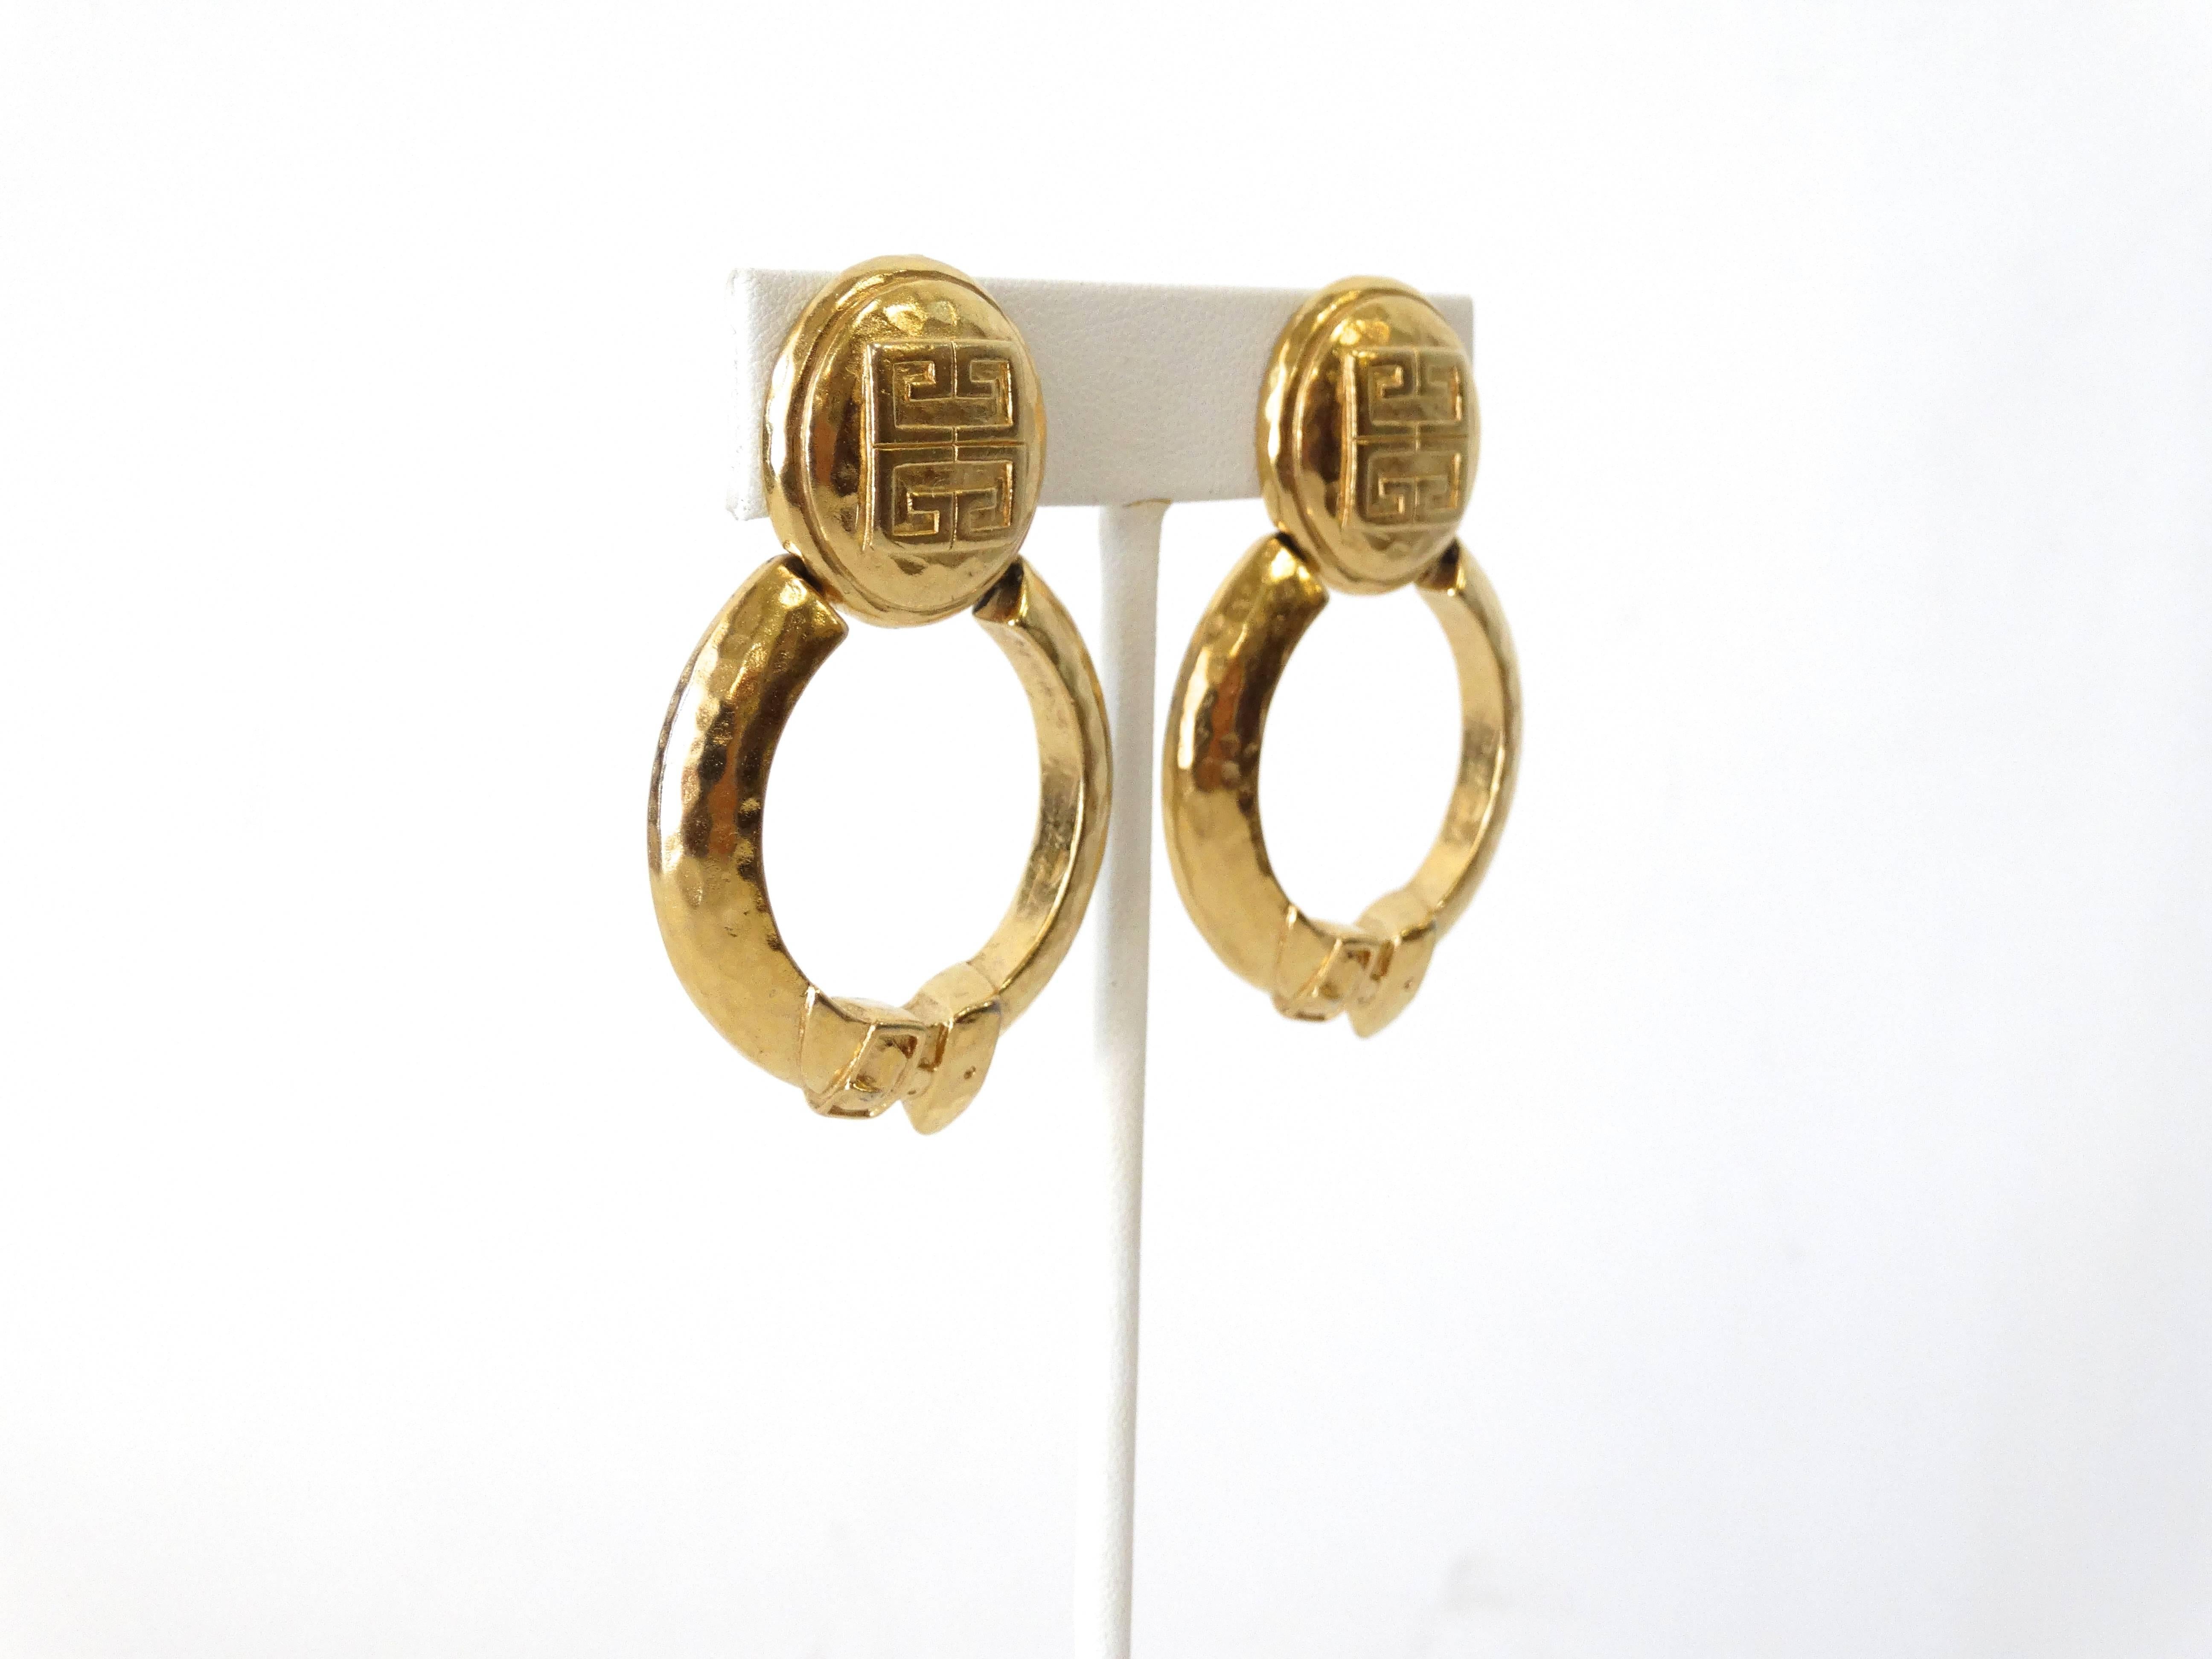 Rock a statement earring in our 1980s Givenchy door-knockers! Brilliant gold metal with a hammered finish. Hoop style door knocker earring with unique belt details. Embossed with the Givenchy G logo on the buttons. Signed Givenchy on the back of the